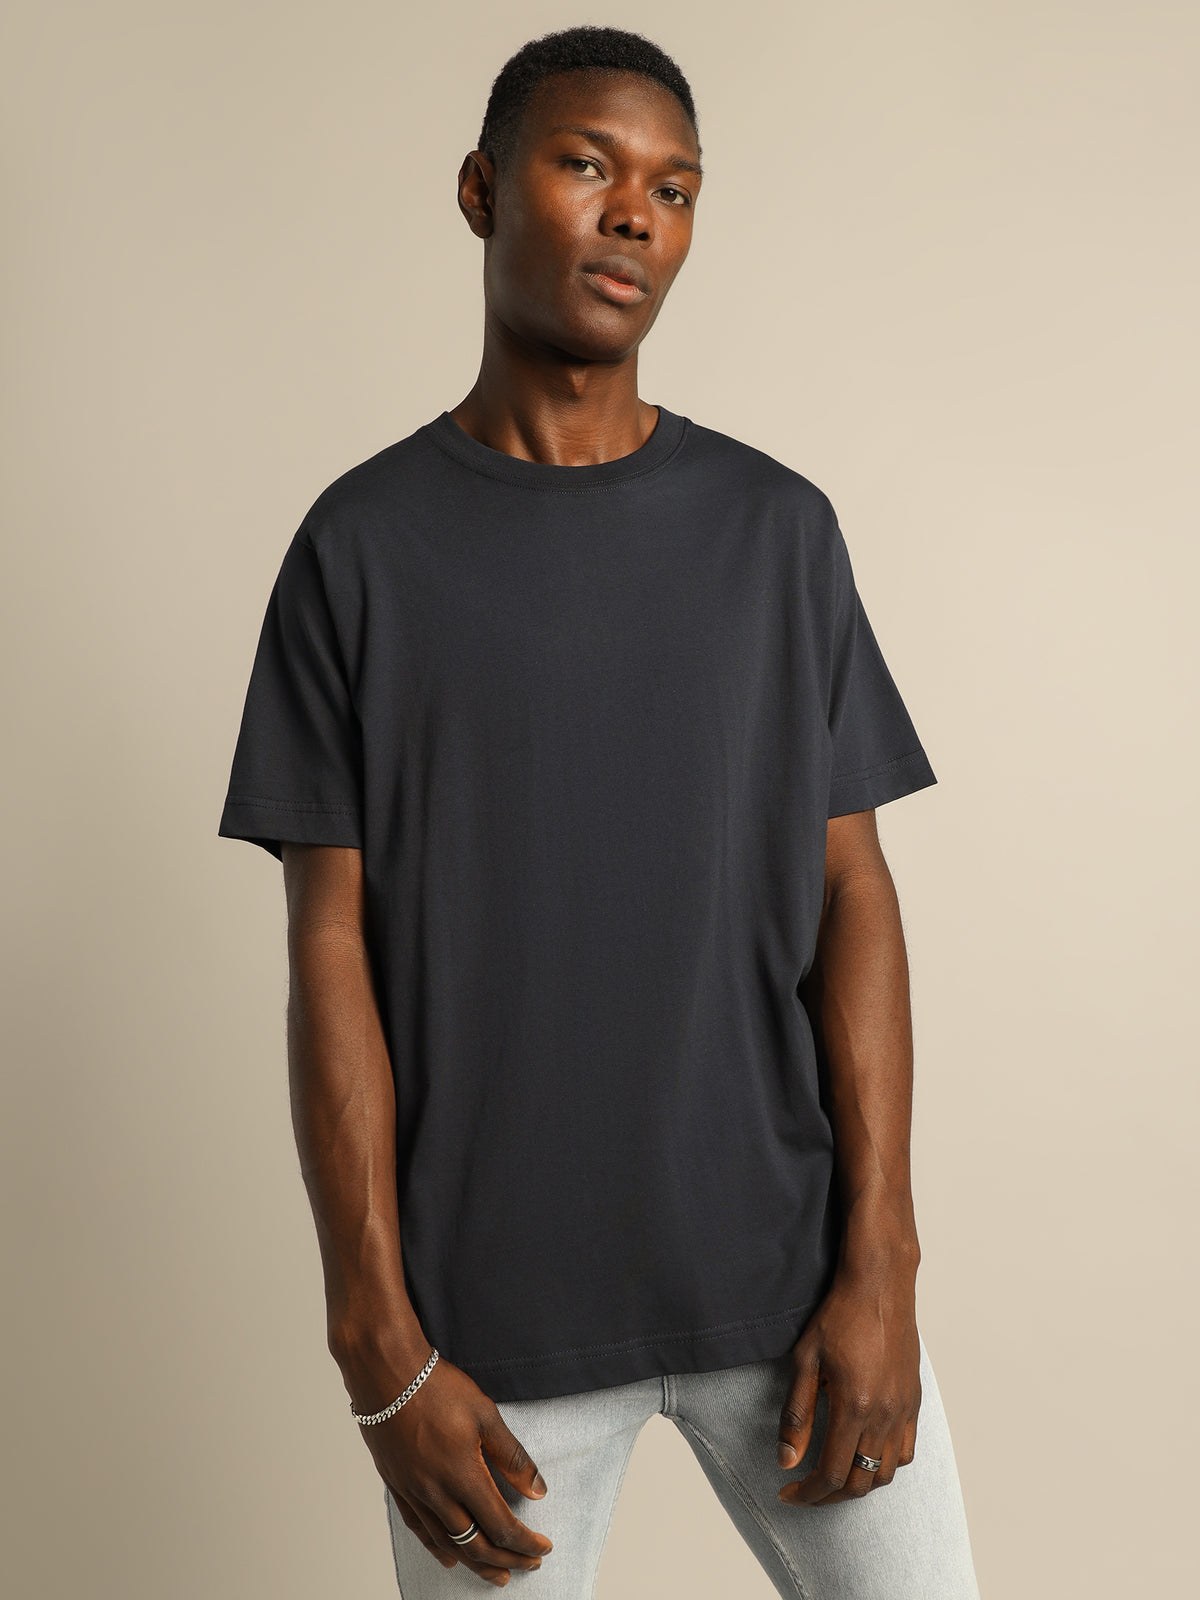 Classic T-Shirt in Navy